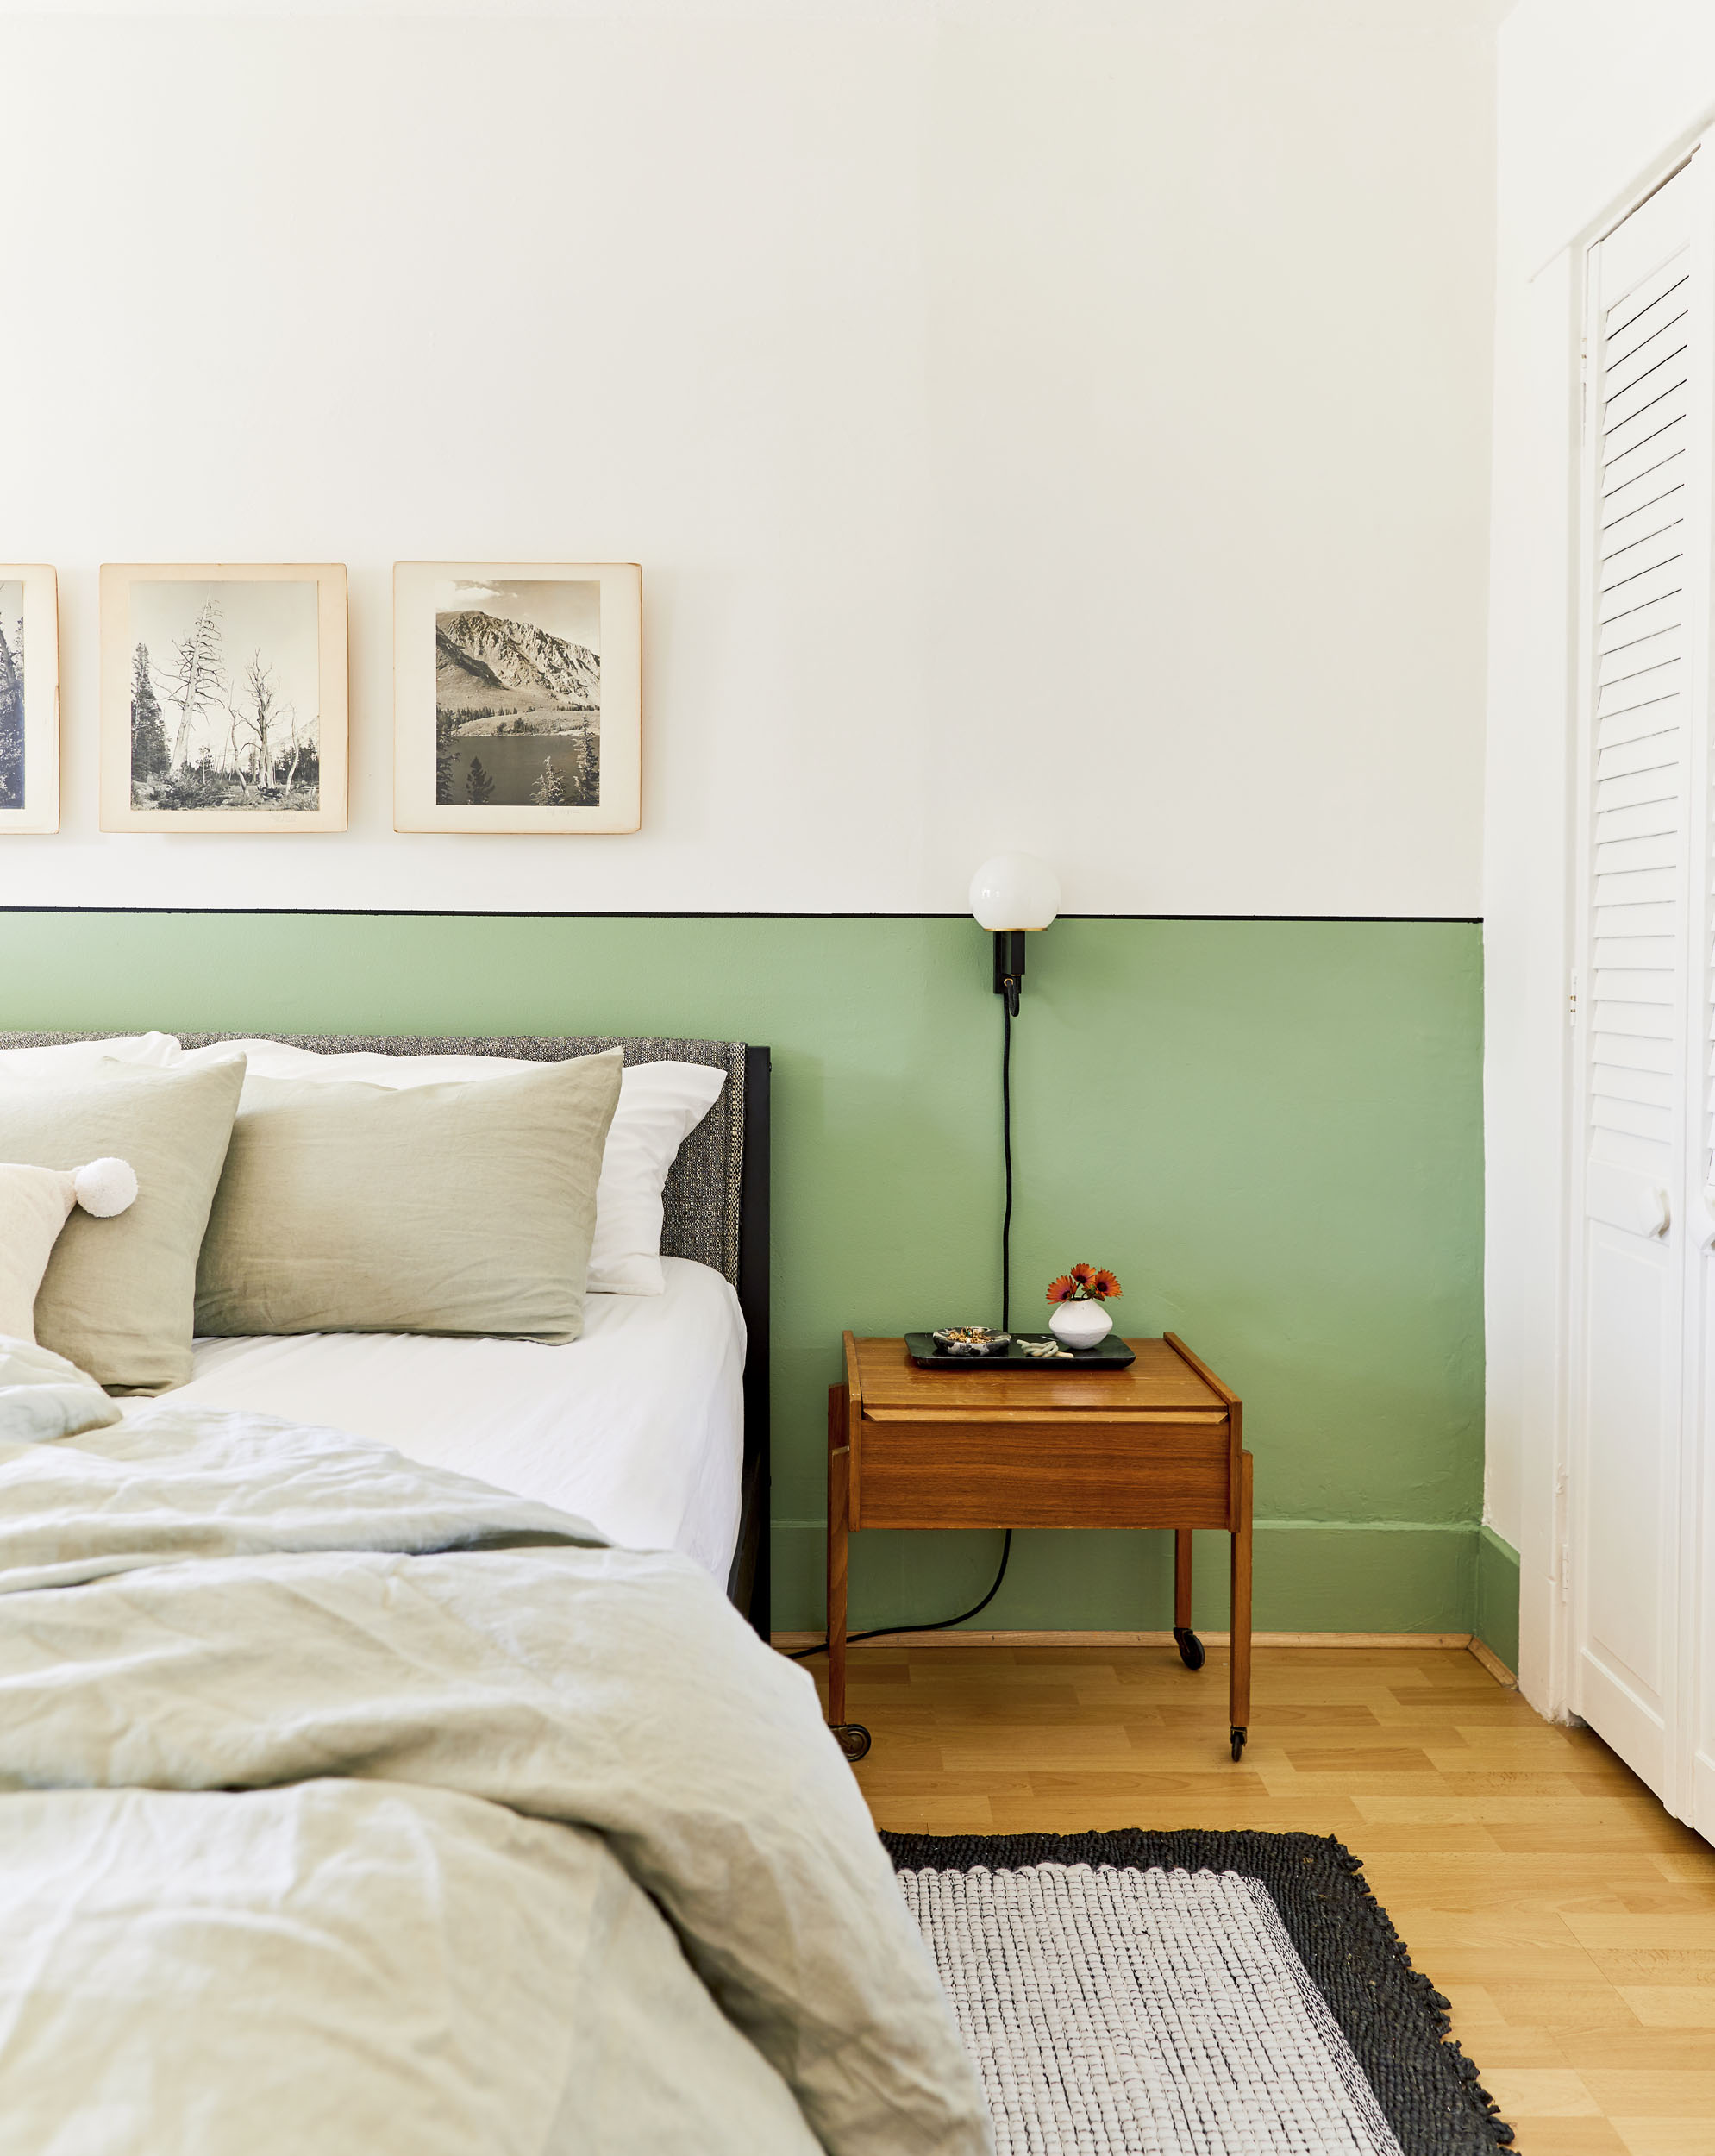 bed sitting against a half-painted green wall